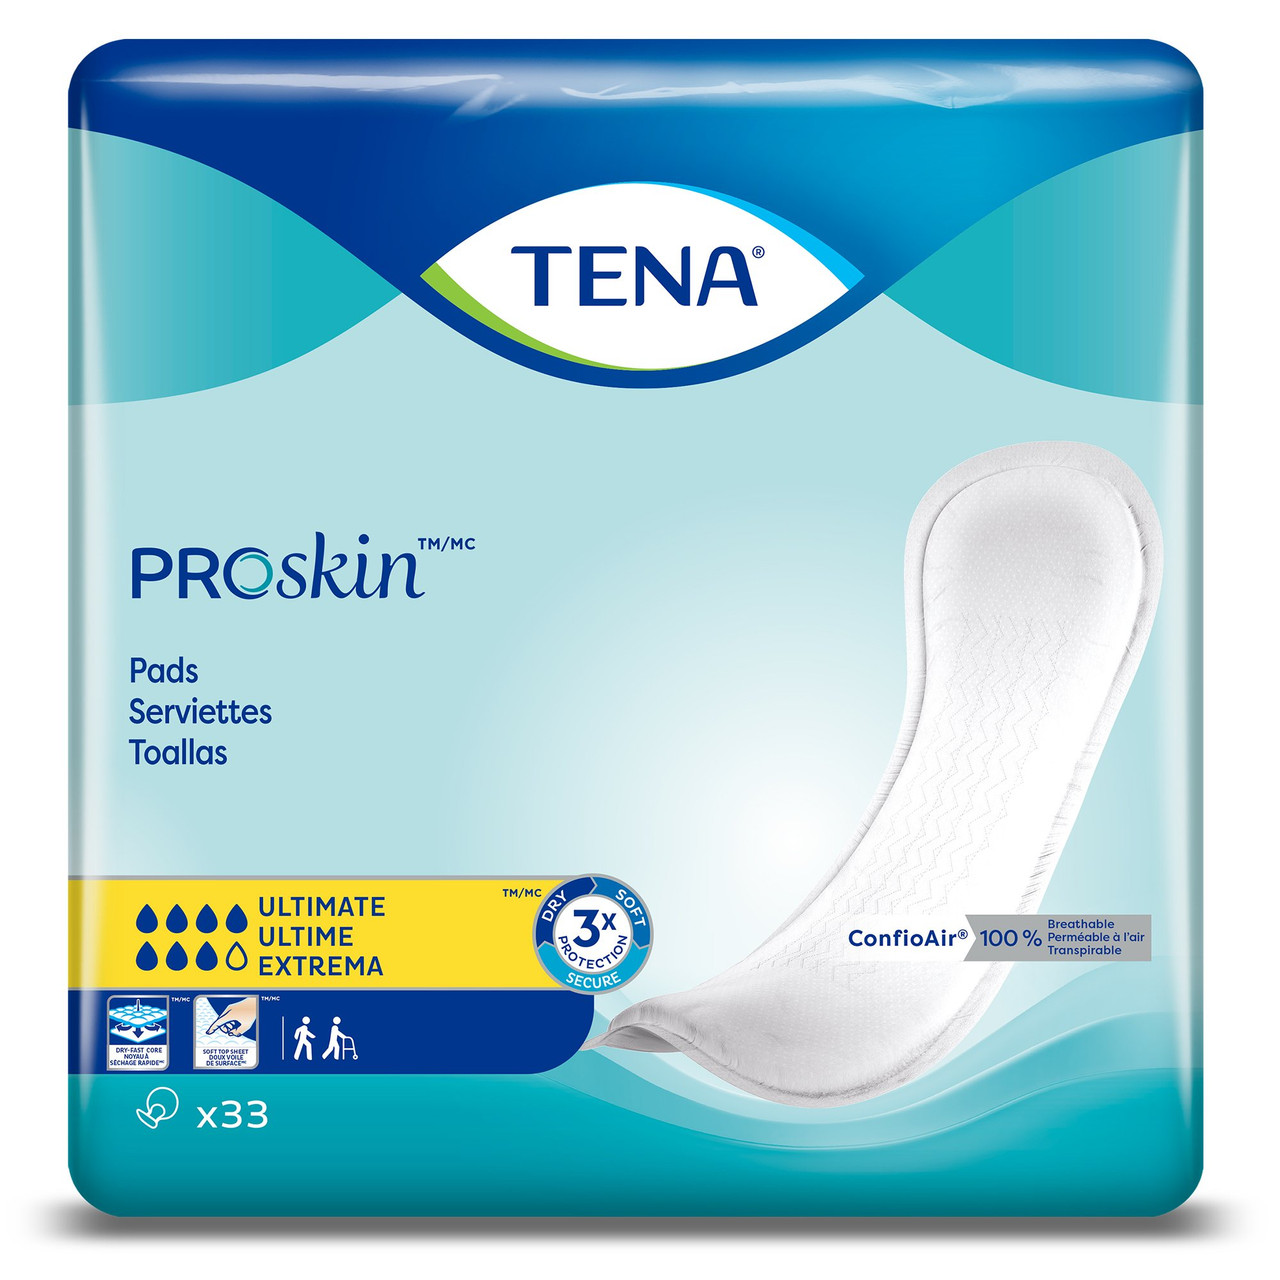 TENA Light Bladder Control Pads, Ultimate Absorbency - Unisex, One Size  Fits Most, 16 in L - Simply Medical